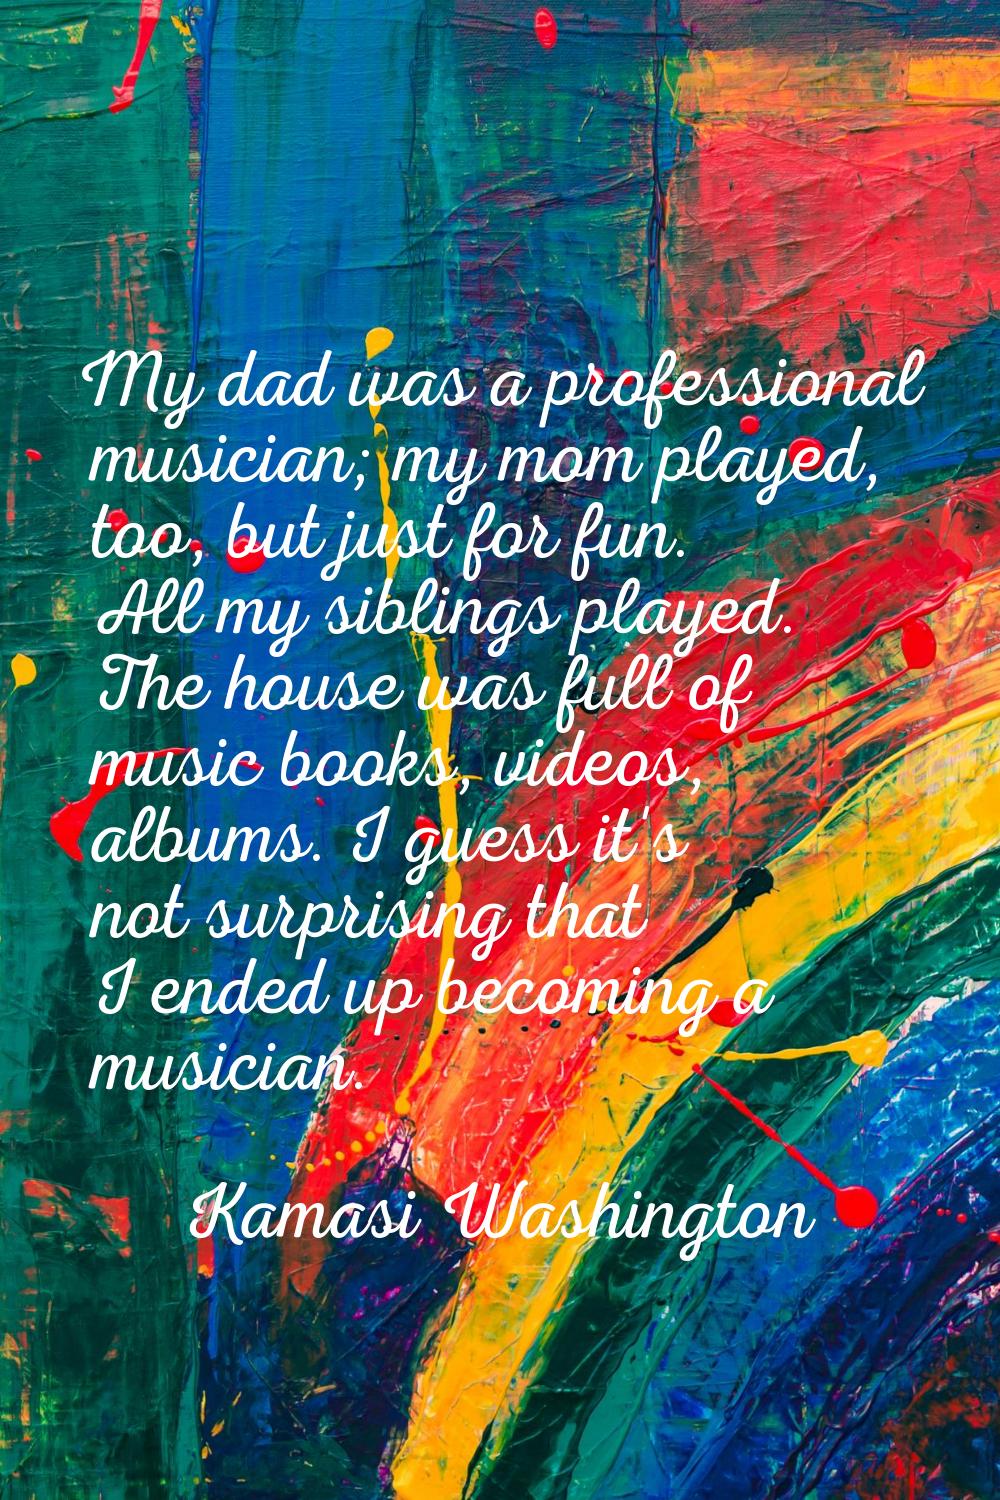 My dad was a professional musician; my mom played, too, but just for fun. All my siblings played. T